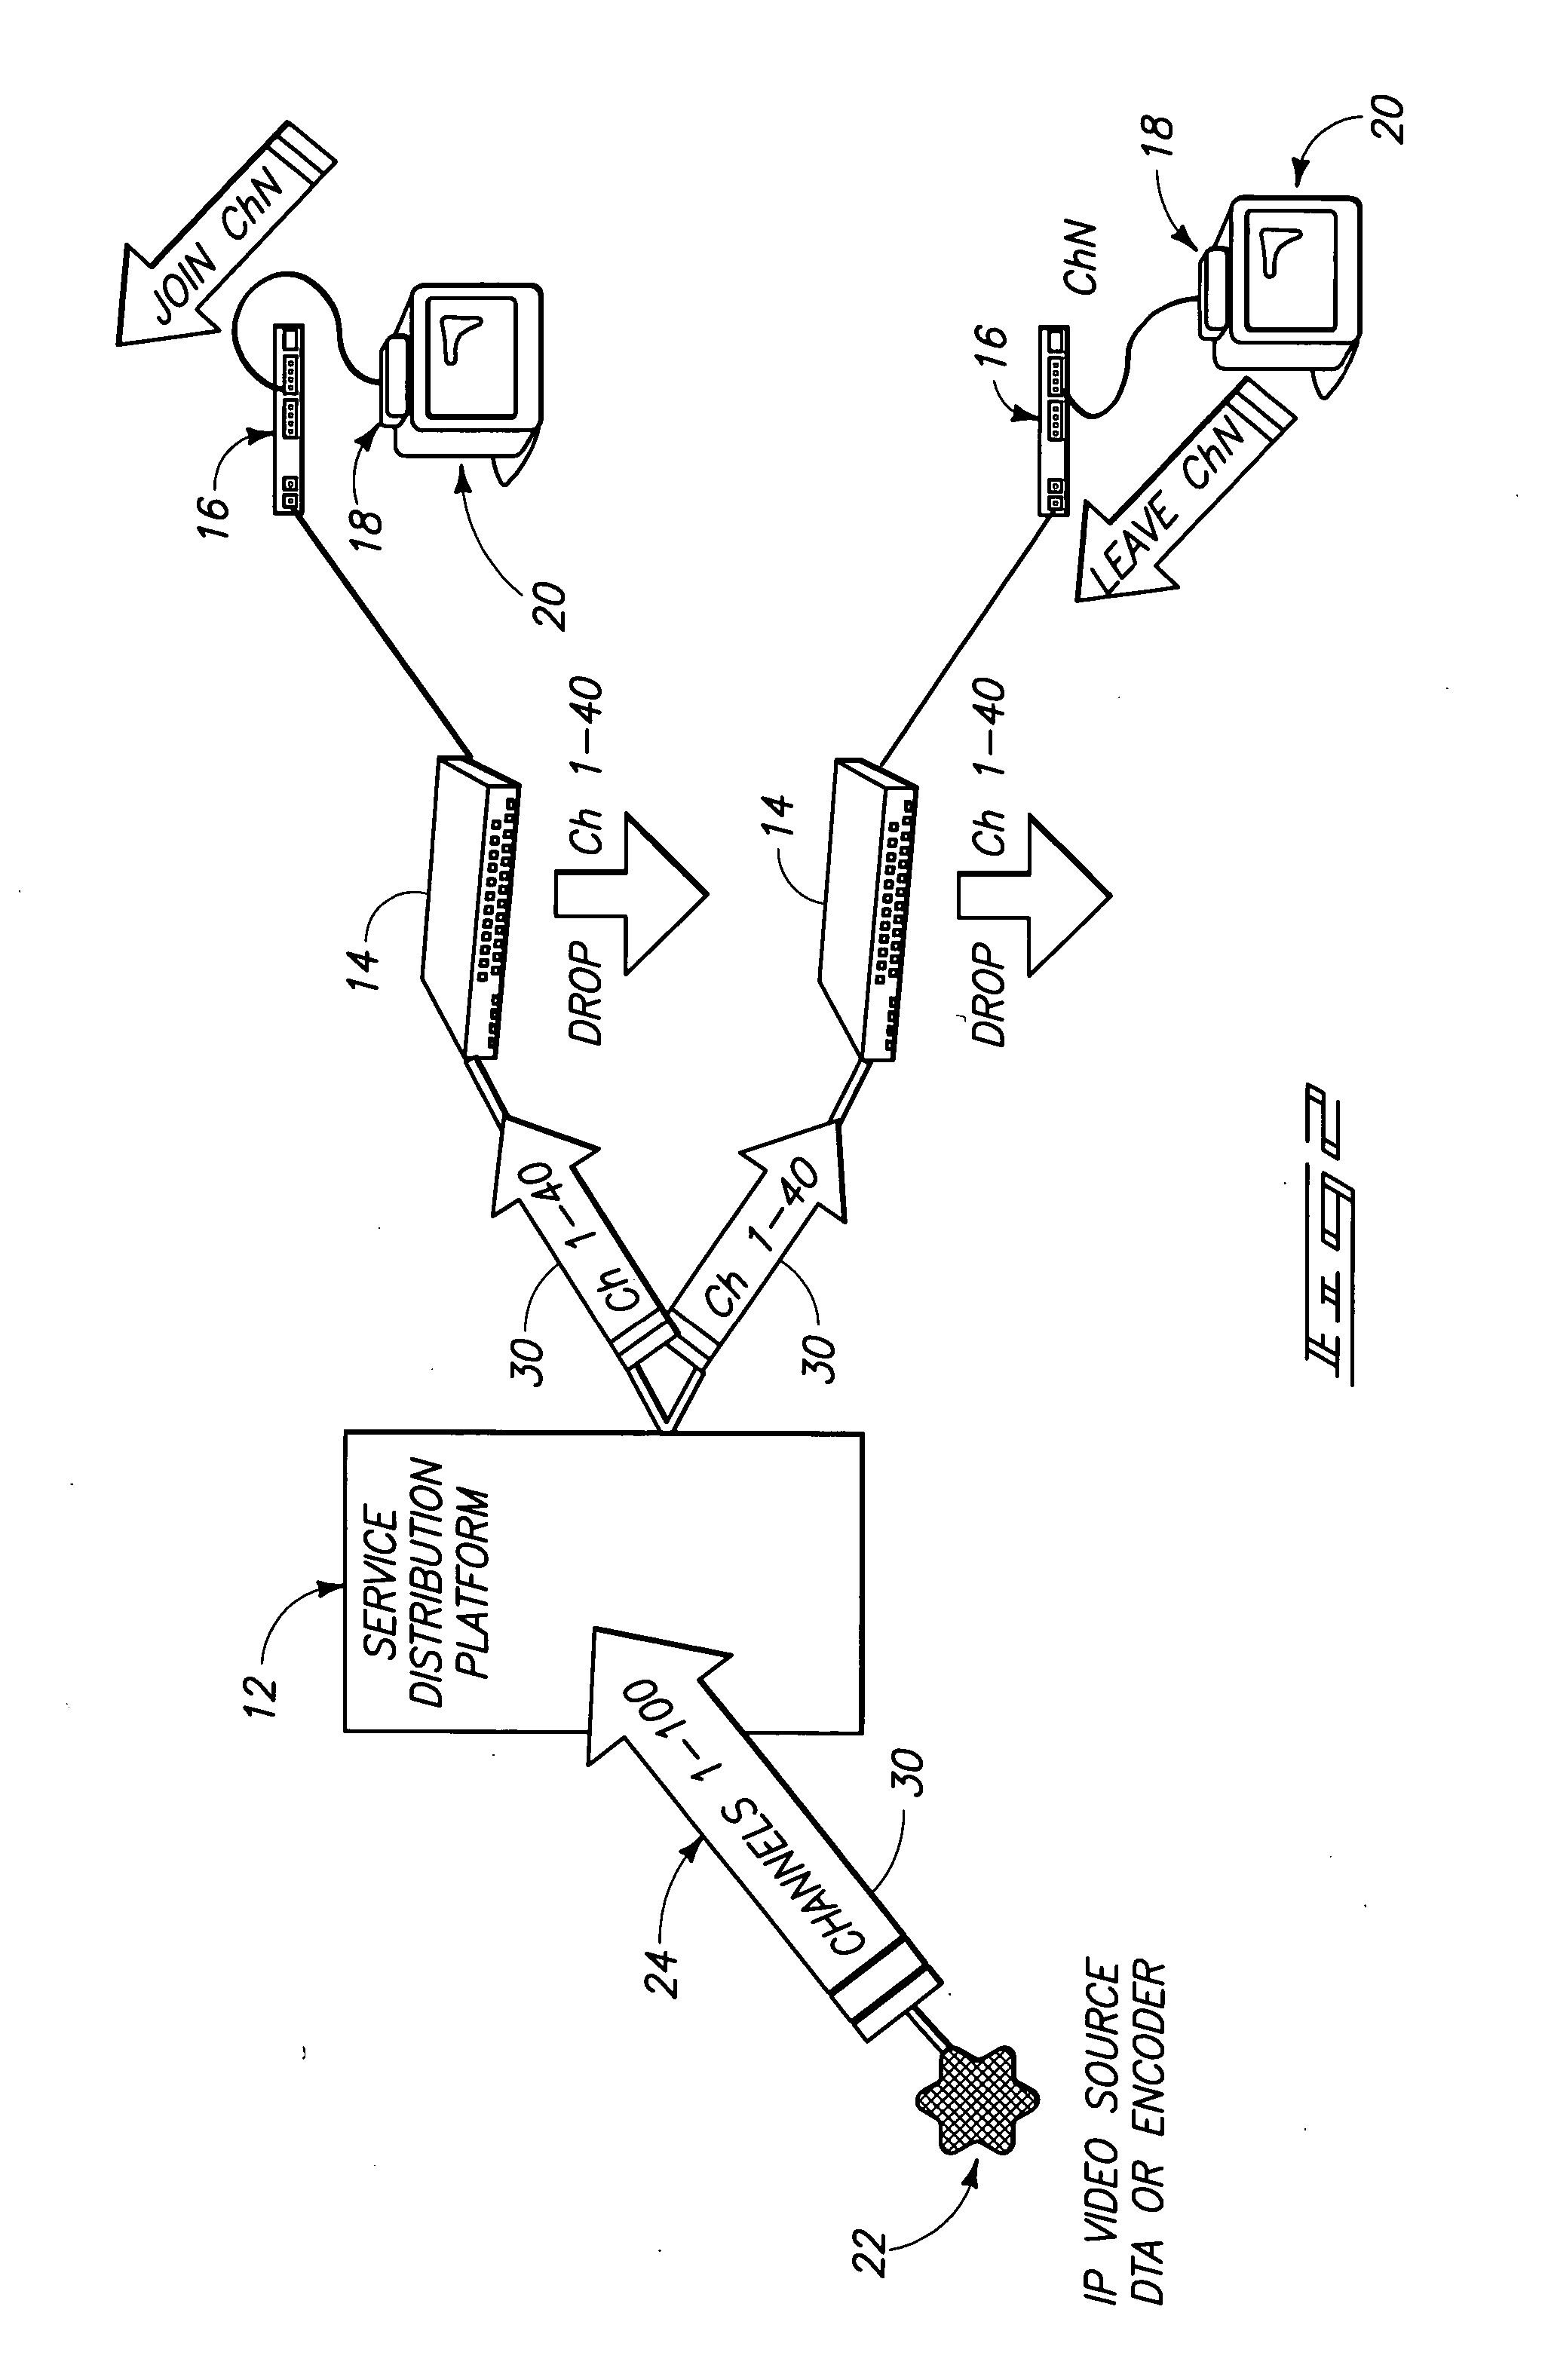 Multicast services control system and method